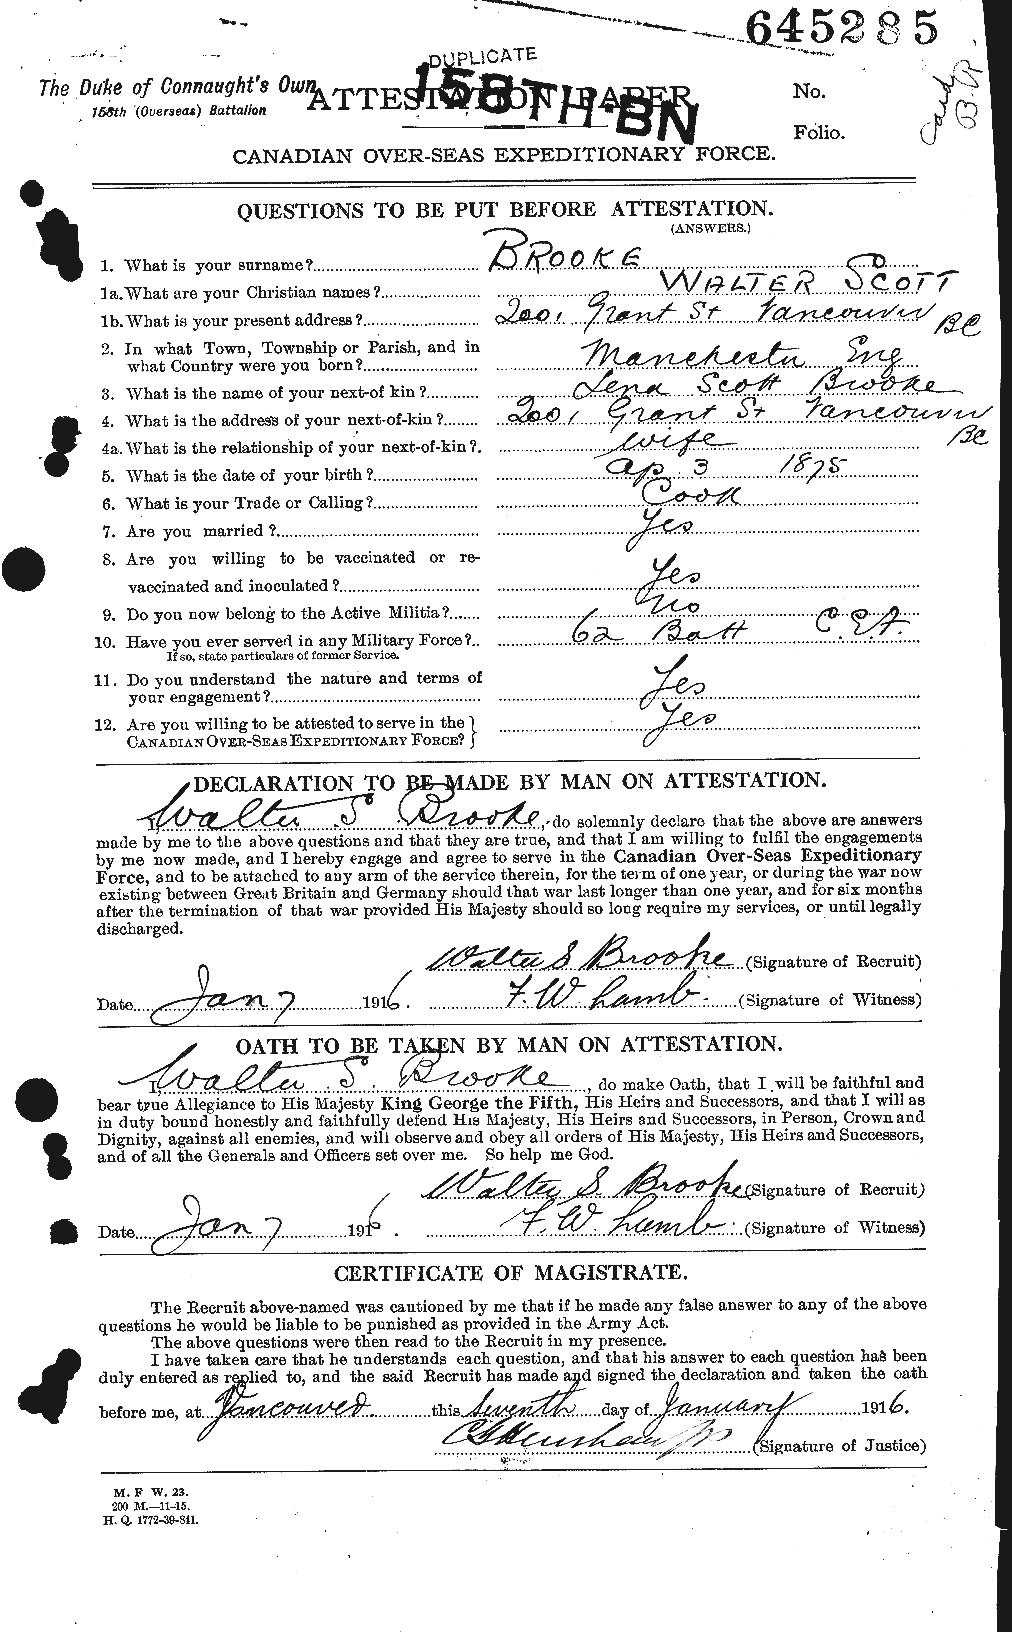 Personnel Records of the First World War - CEF 263008a